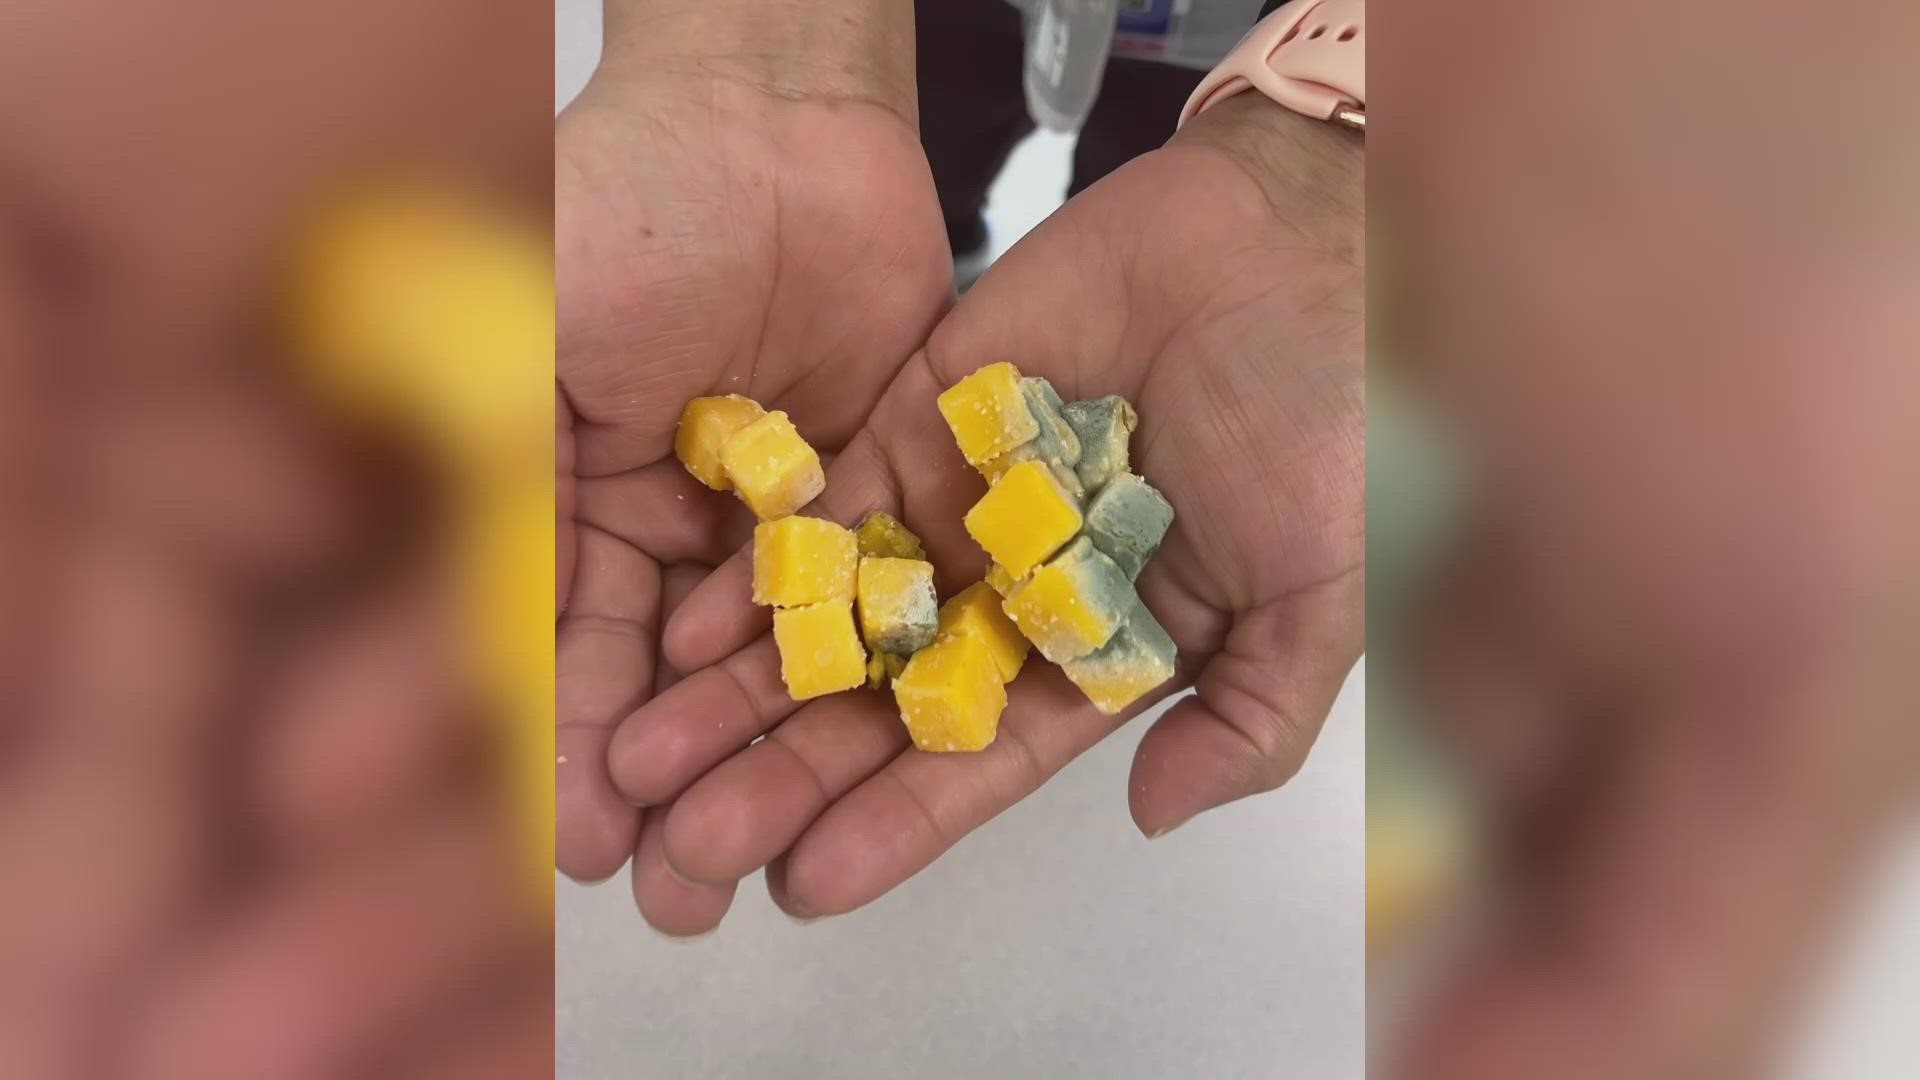 District officials said the student consumed a piece of the moldy cheese.